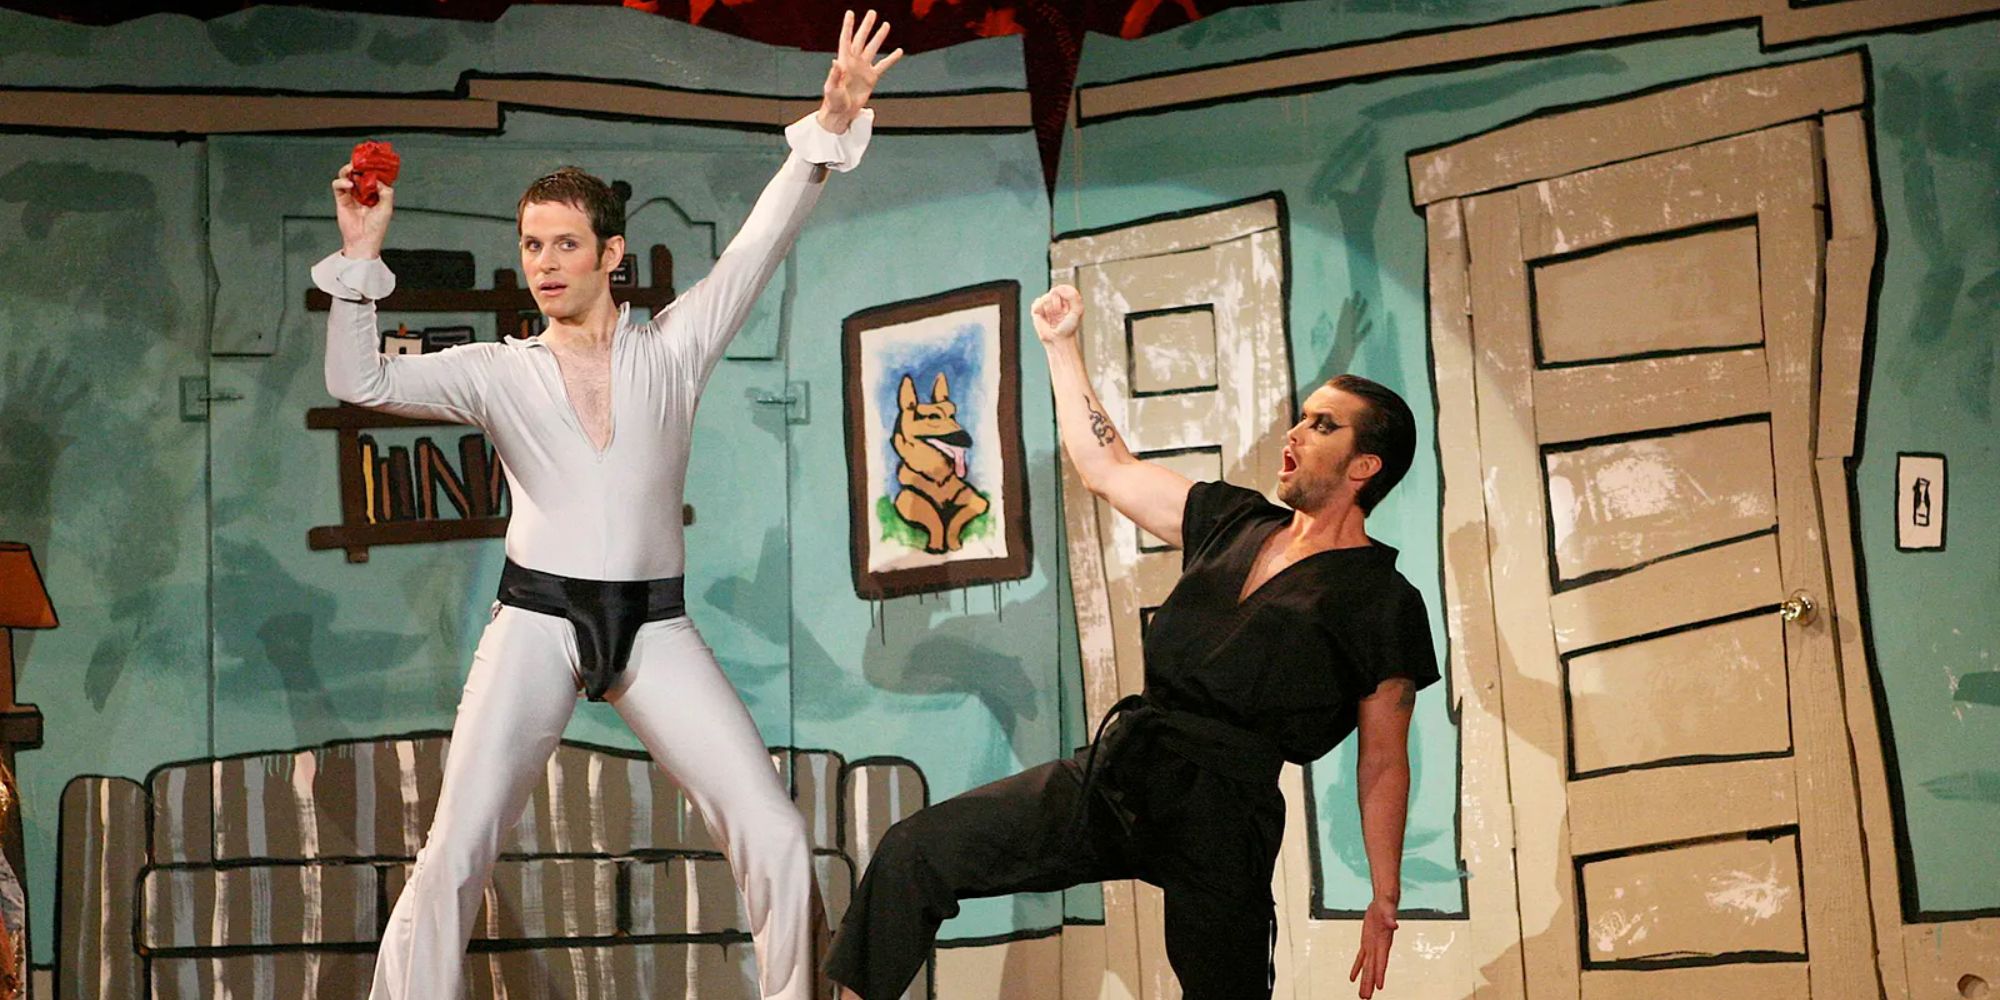 Dennis and Mac on stage in The Nightman Cometh episode of It's Always Sunny in Philadelphia